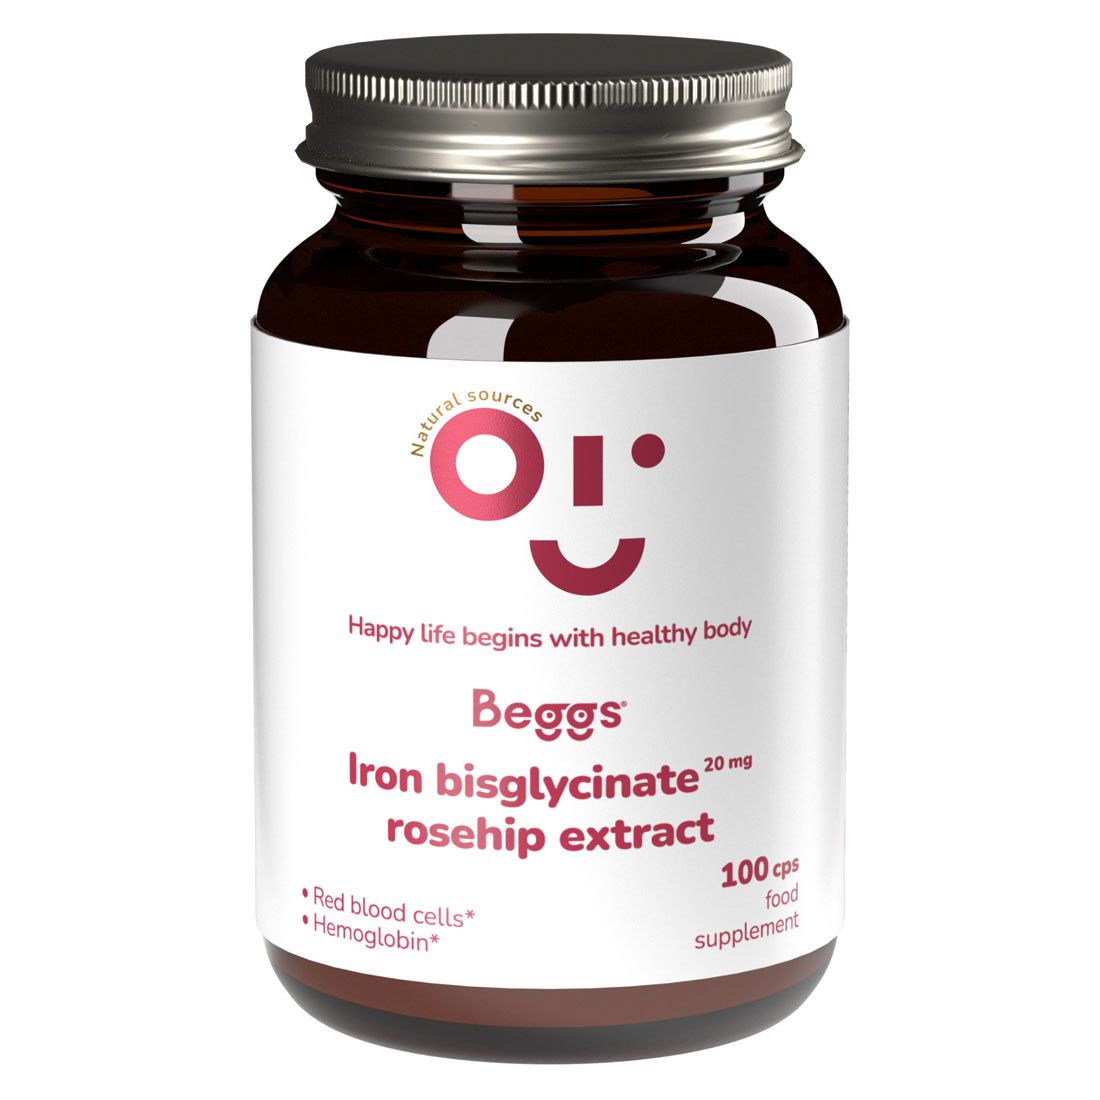 Beggs Iron bisglycinate 20 mg rosehip extract 100 kapslí Beggs